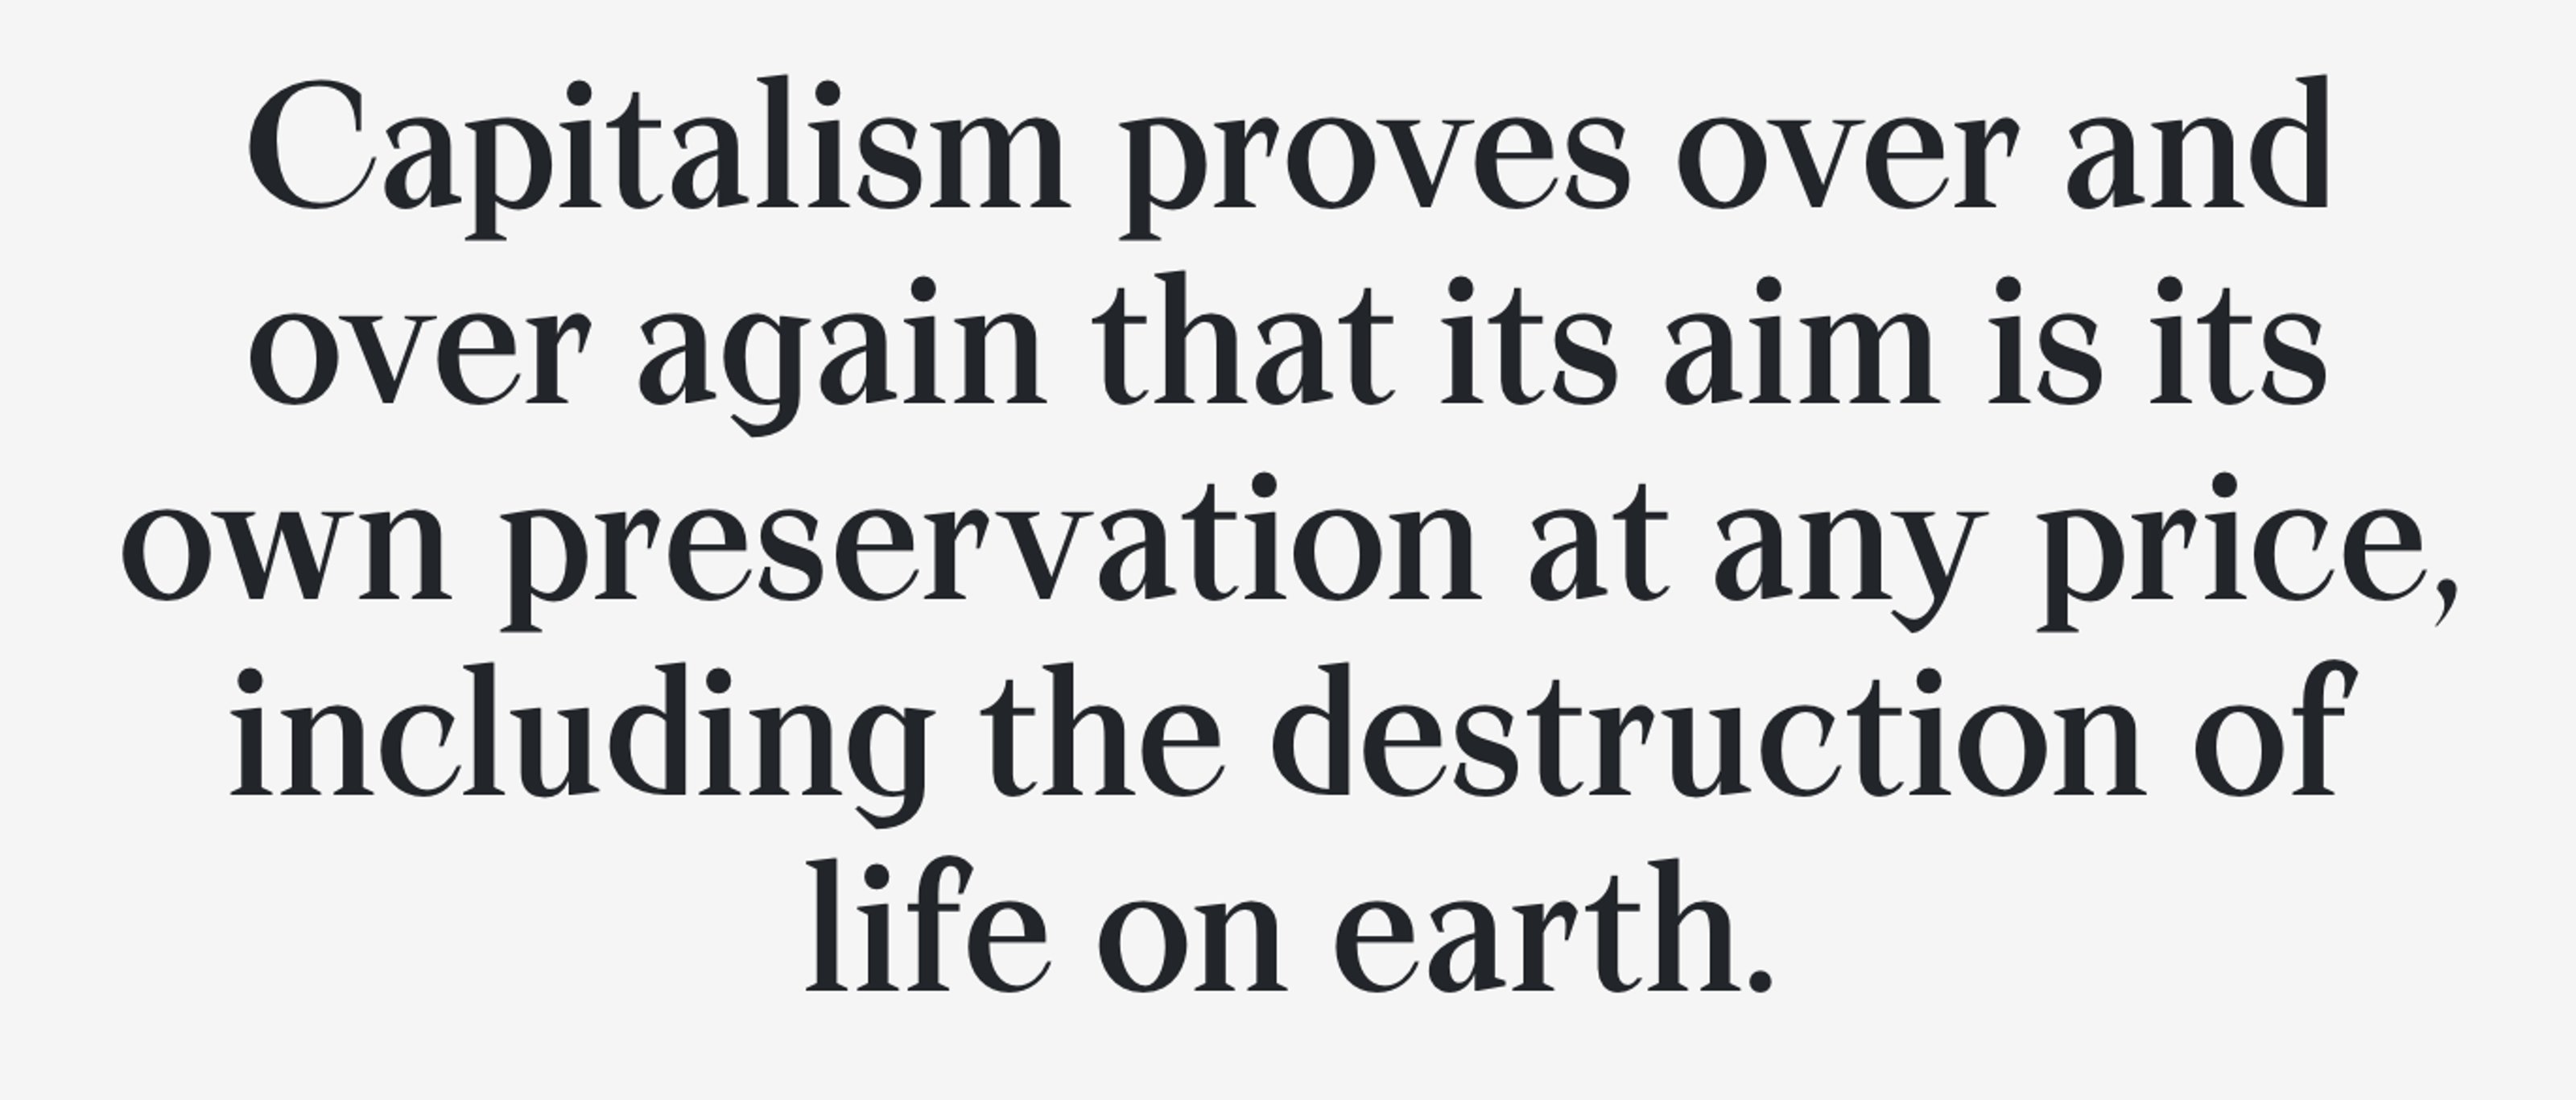 Quote: Capitalism proves over and over again that its aim is its own preservation at any price, including the destruction of life on earth.